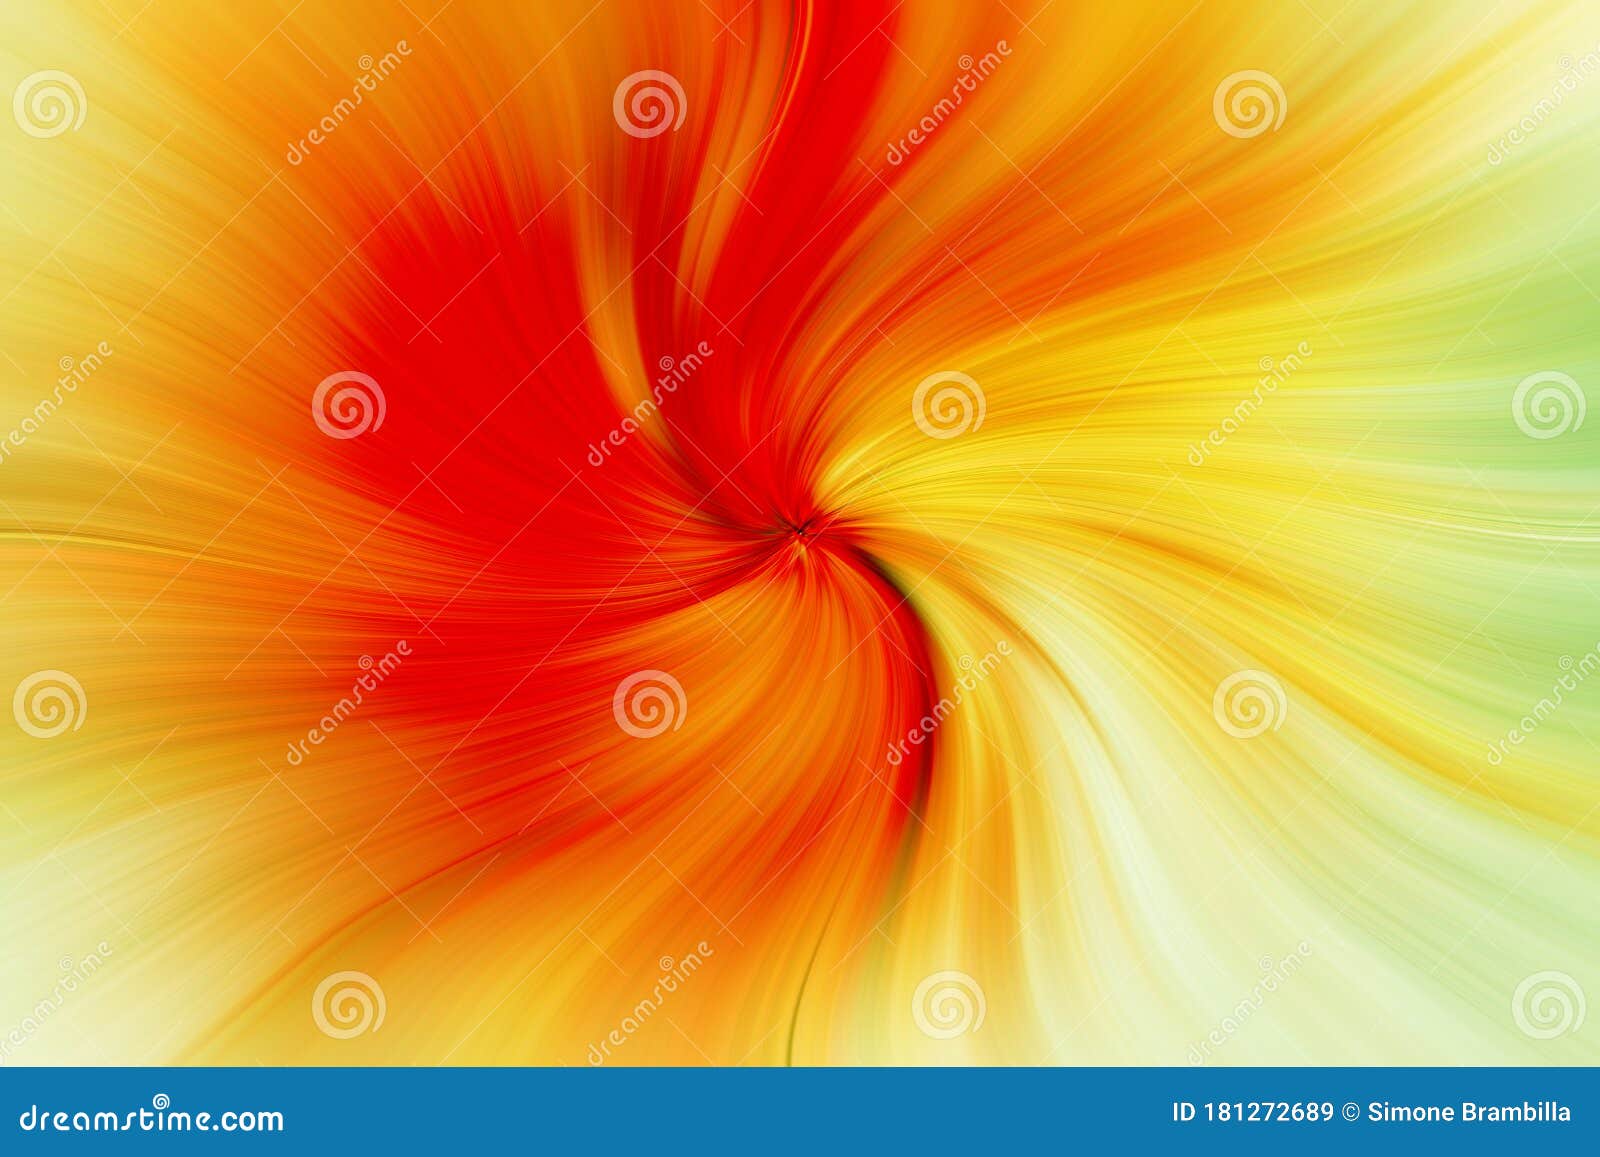 abstract image composed of colored lines that create spirals